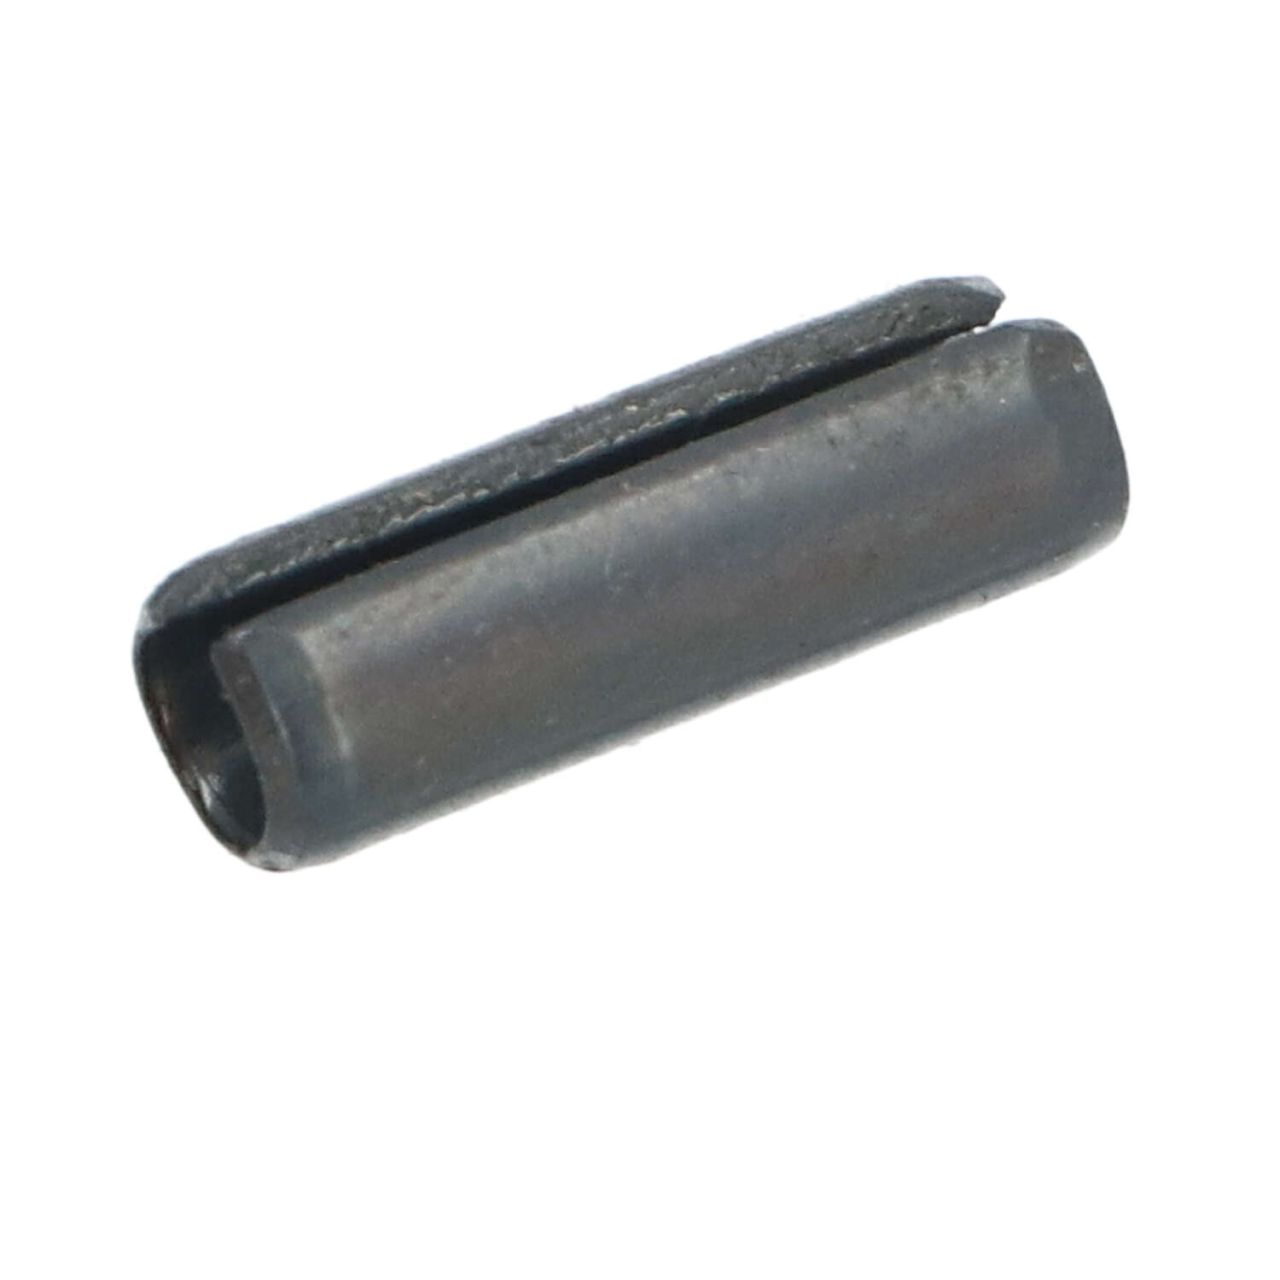 Roll pin for 3/4 tube